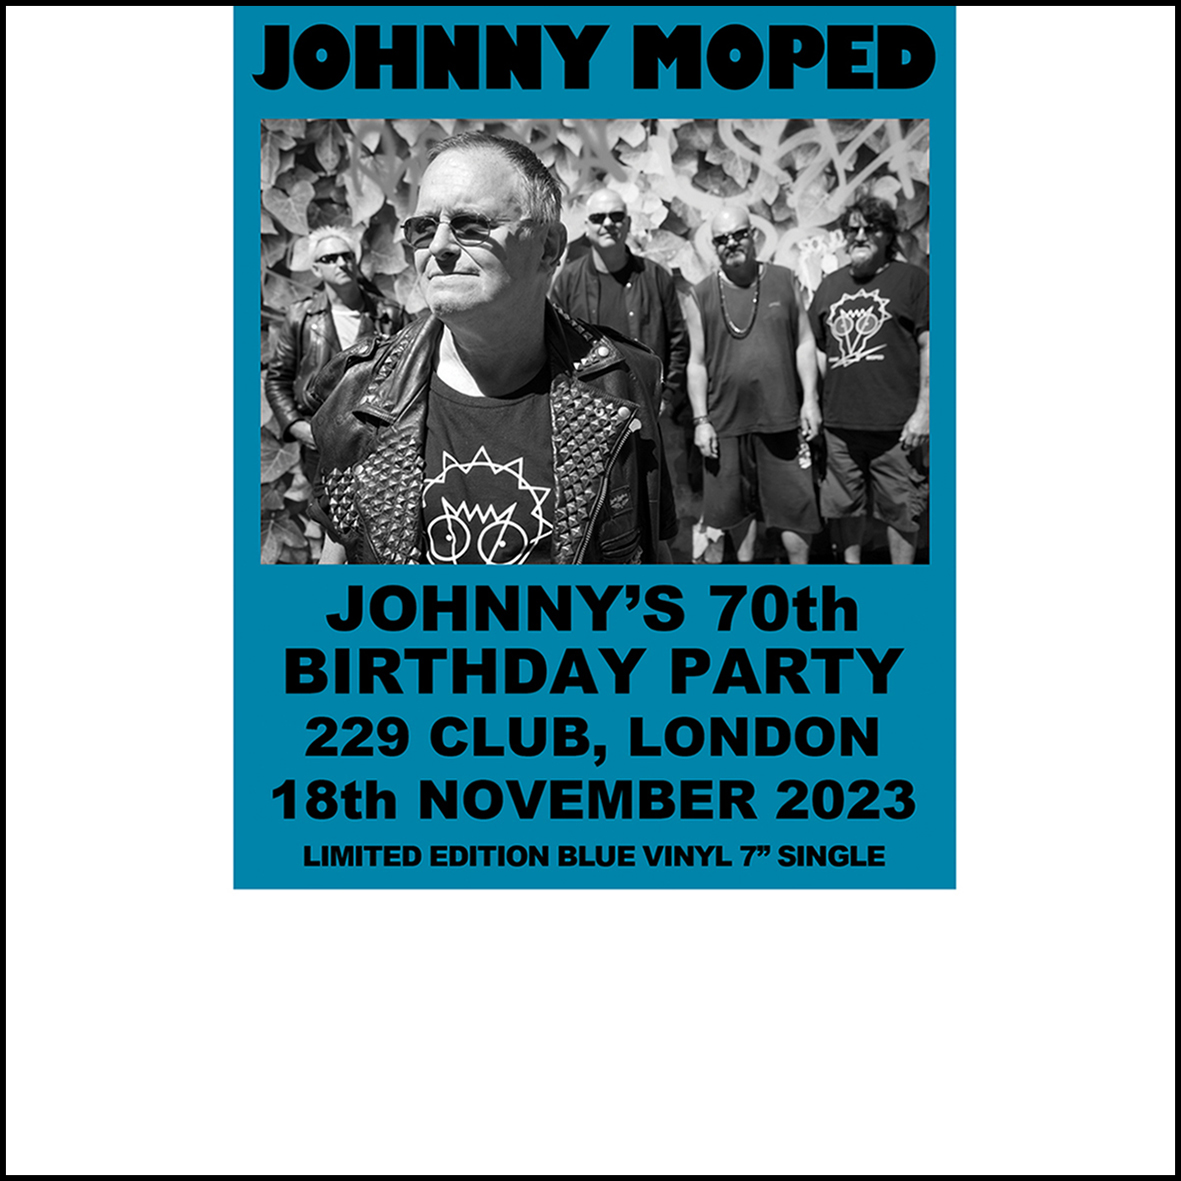 OUT THIS FRIDAY - @johnnymopedreal 'LOCKDOWN BOY' Limited BLUE 7' in shops or the RED vinyl copy is available only at the Moped gig on Saturday at the 229 Club, London @punk_human damagedgoods.greedbag.com